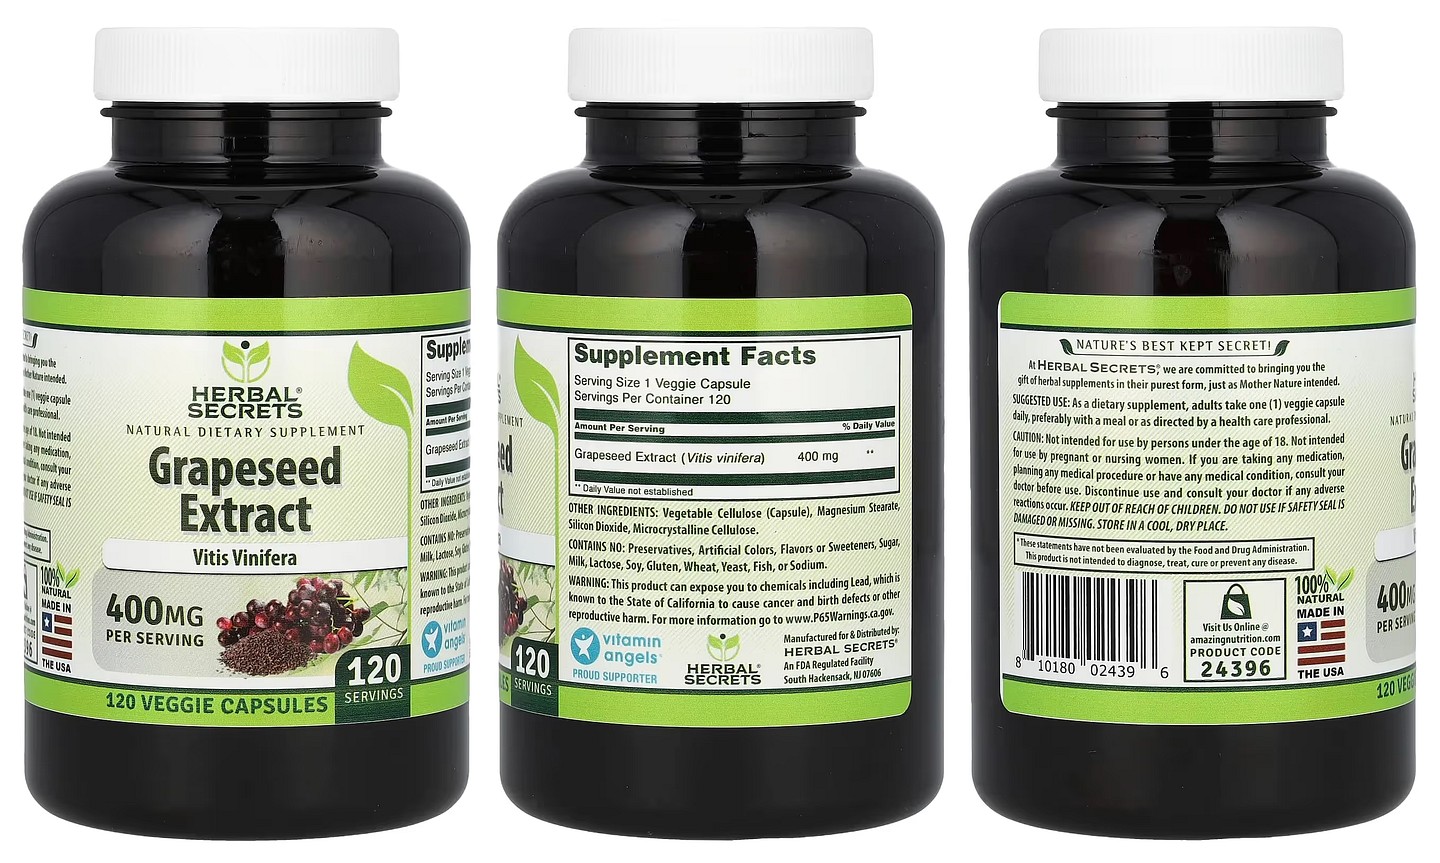 Herbal Secrets, Grapeseed Extract packaging